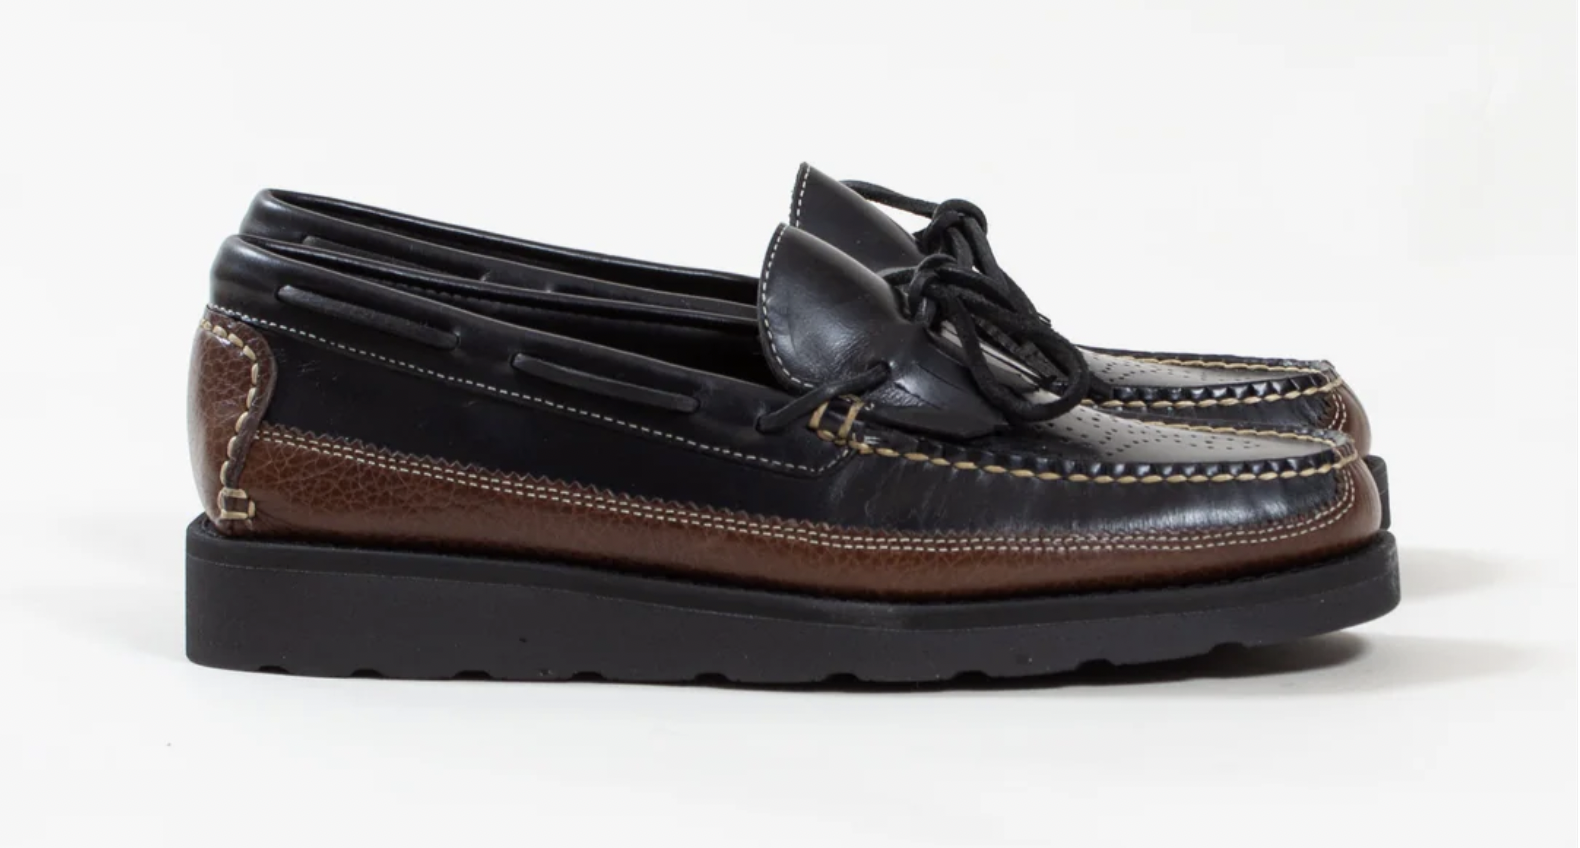 Bright Shoemakers - Kiltie Moc Loafer - Black and Brown Pull Up